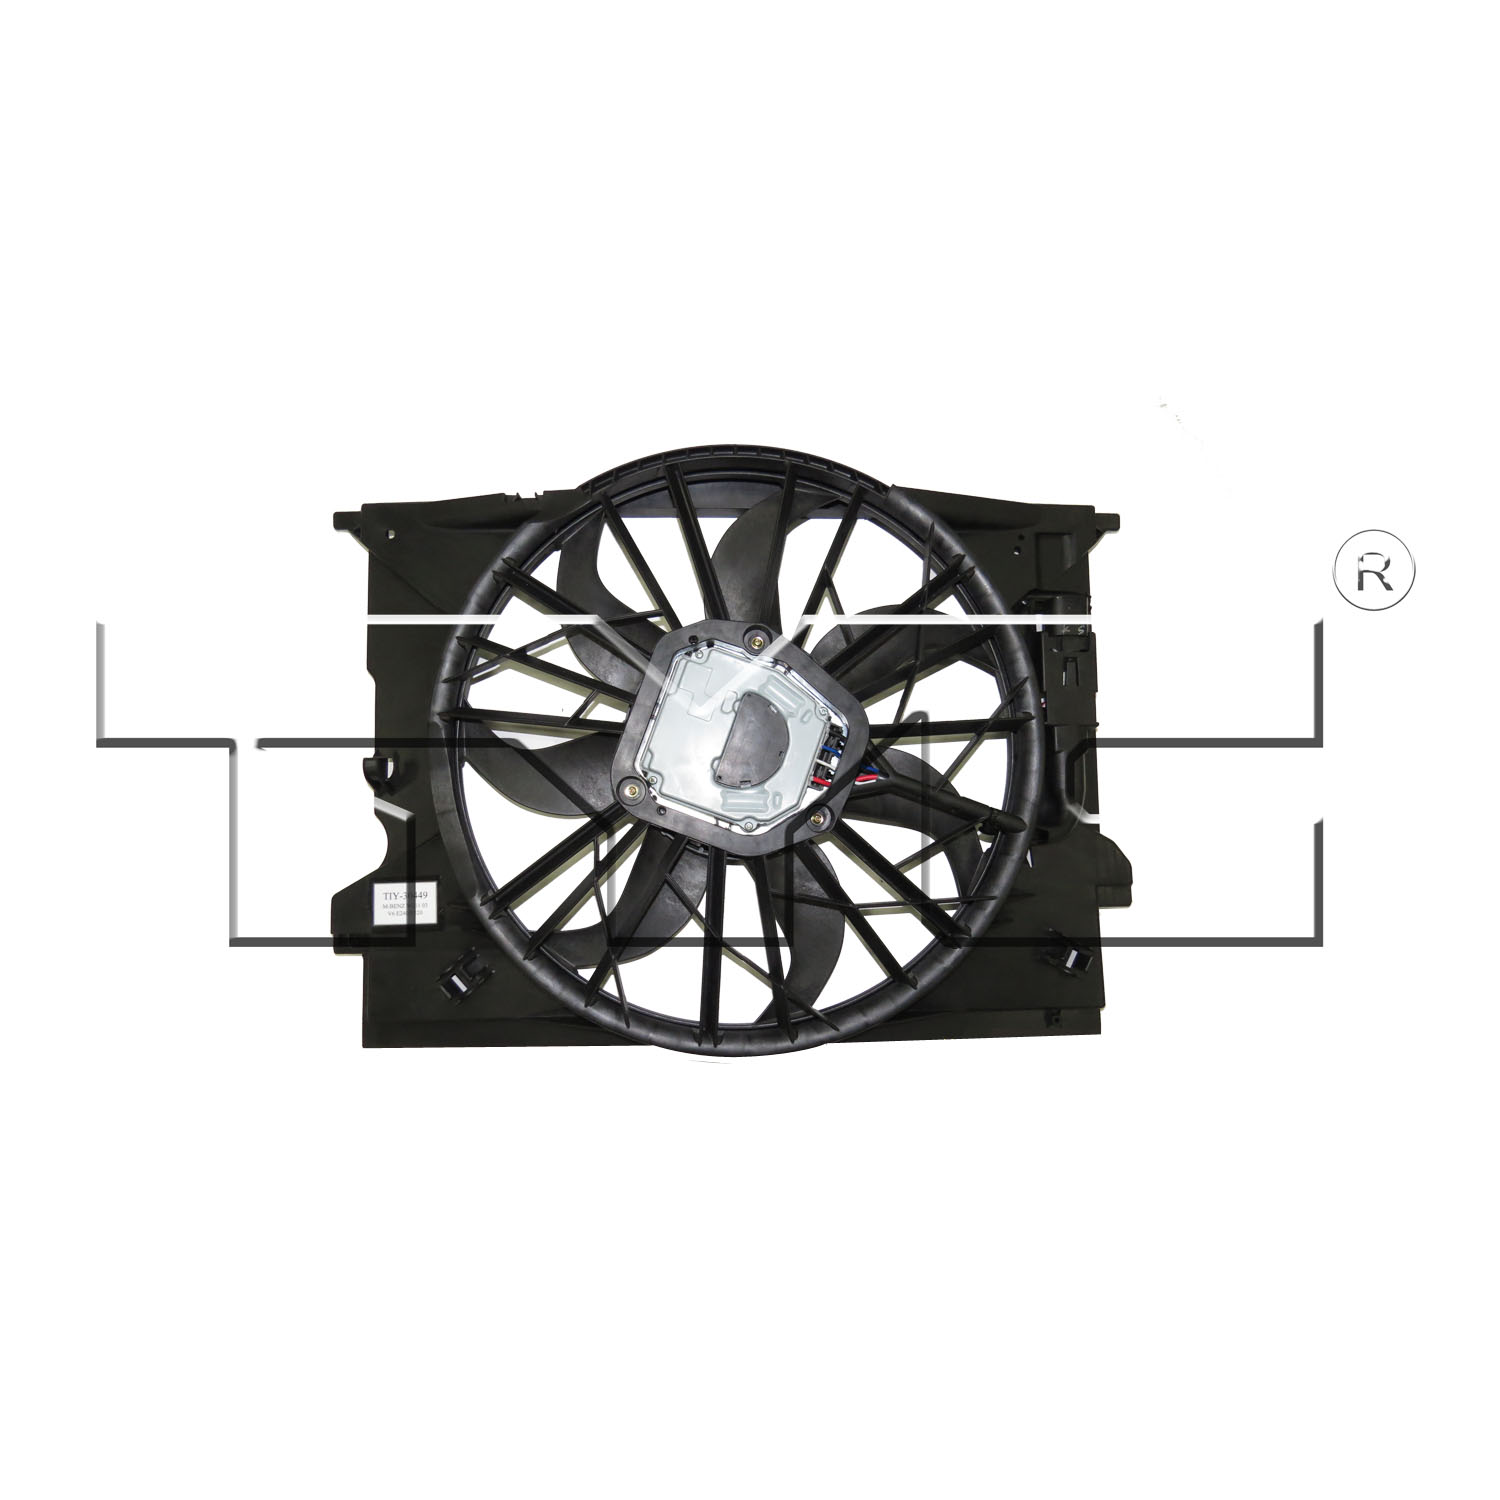 Aftermarket FAN ASSEMBLY/FAN SHROUDS for MERCEDES-BENZ - E55 AMG, E55 AMG,04-06,Radiator cooling fan assy